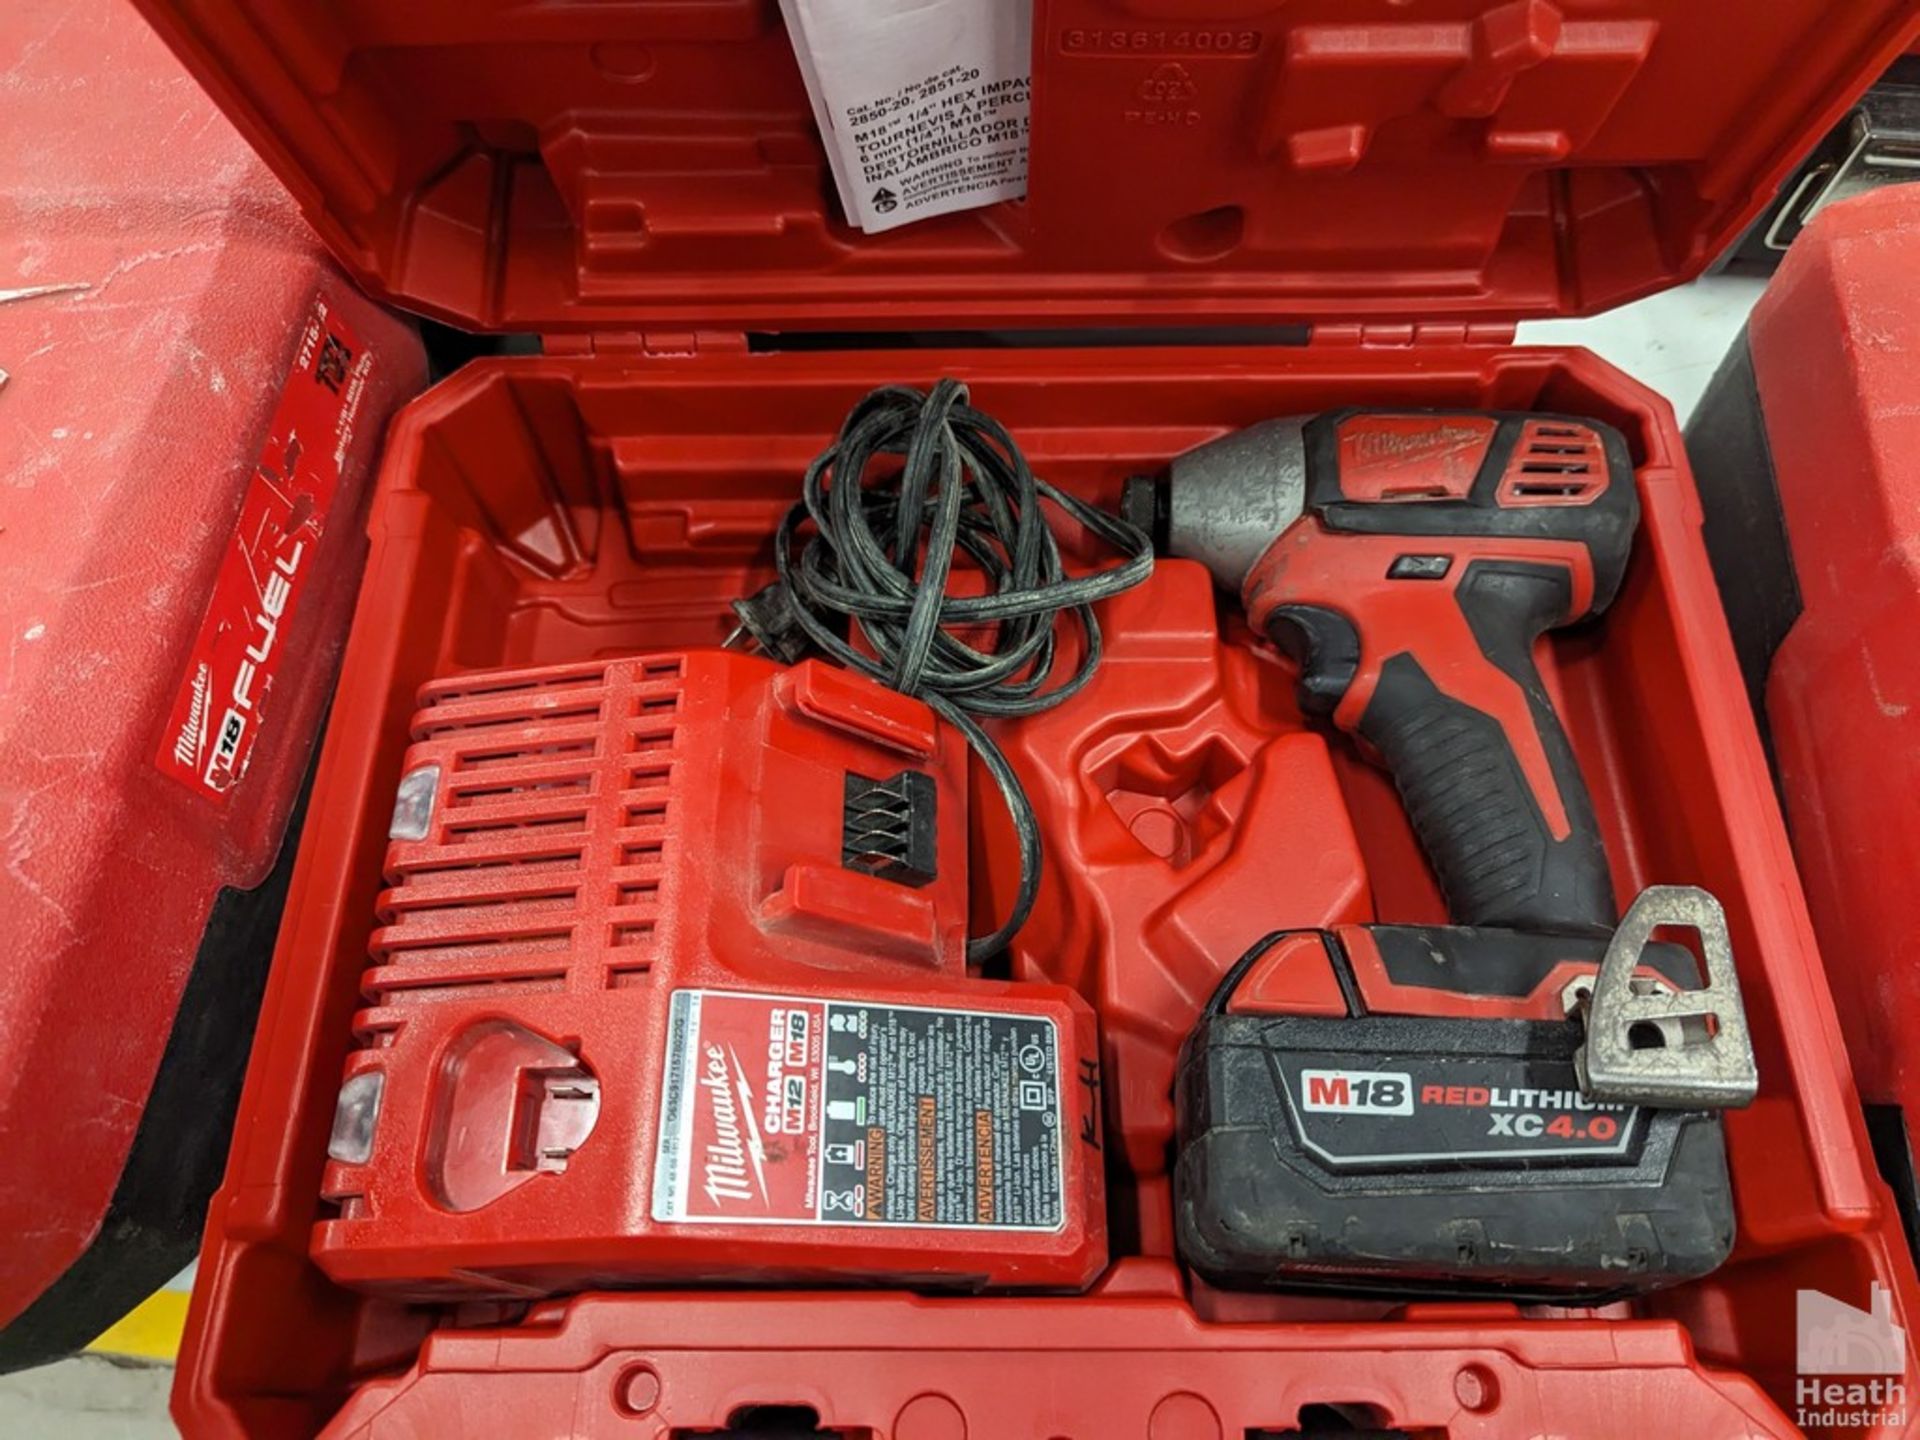 MILWAUKEE 18 VOLT DRILL WITH BATTERY, CHARGER AND CASE